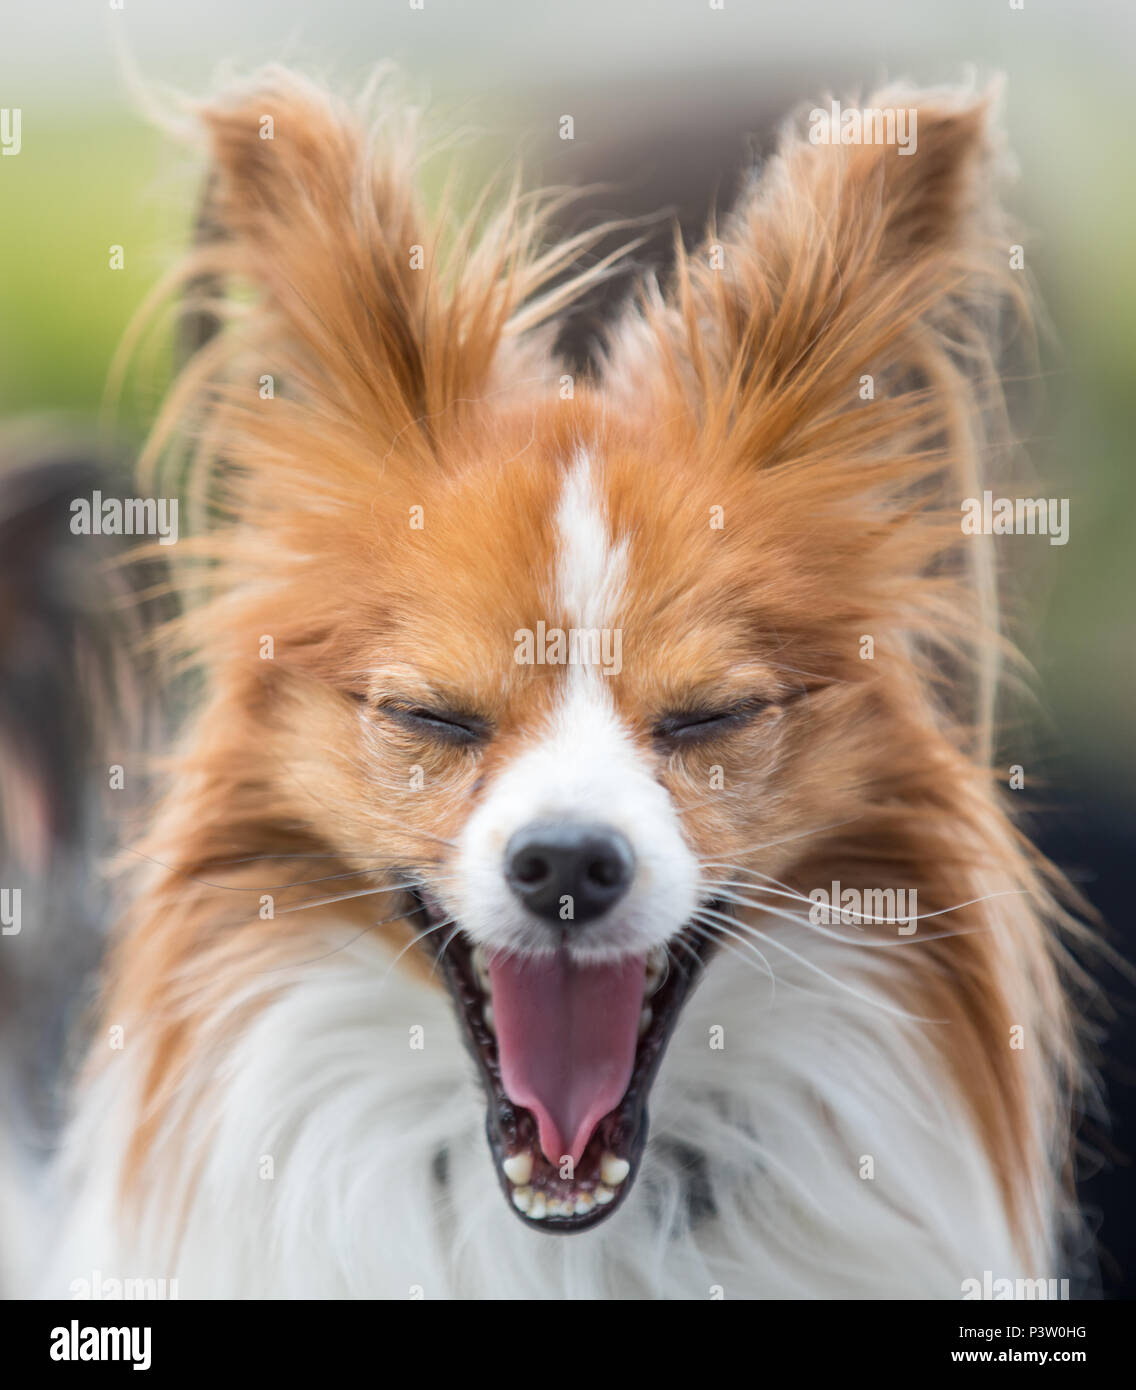 Erfurt, Germany. 16th June, 2018. A Papillon dog yawns at the International and National Pedrigee Dogs Show as well as the International Pedigree Cats Show at the Erfurt fair. About 4000 dogs and more than 100 cats show themselves at their best. Credit: Arifoto Ug/Michael Reichel/dpa/Alamy Live News Stock Photo